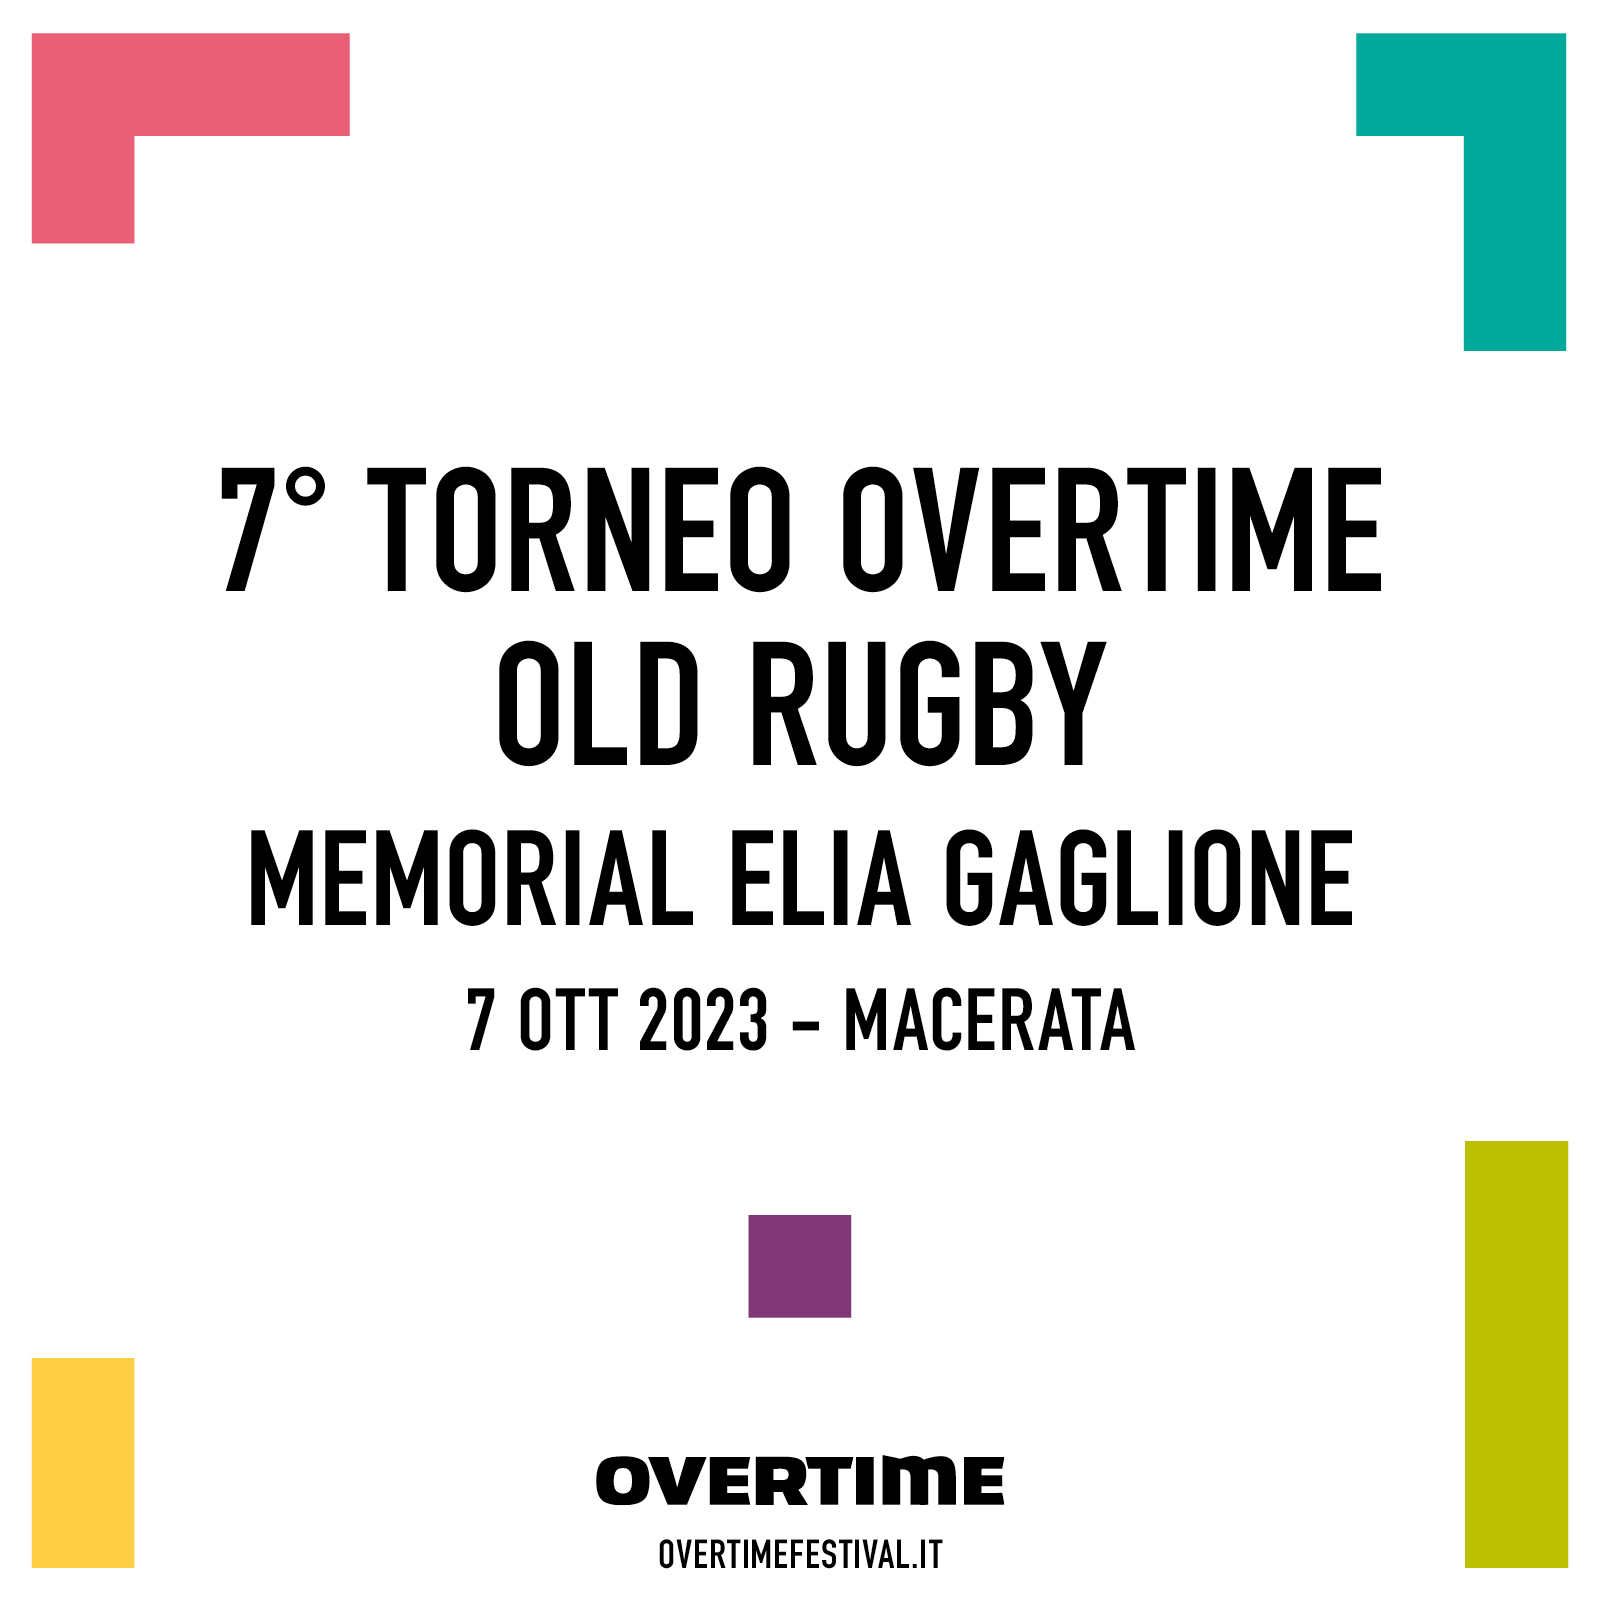 7° TORNEO OVERTIME OLD RUGBY MEMORIAL ELIA GAGLIONE